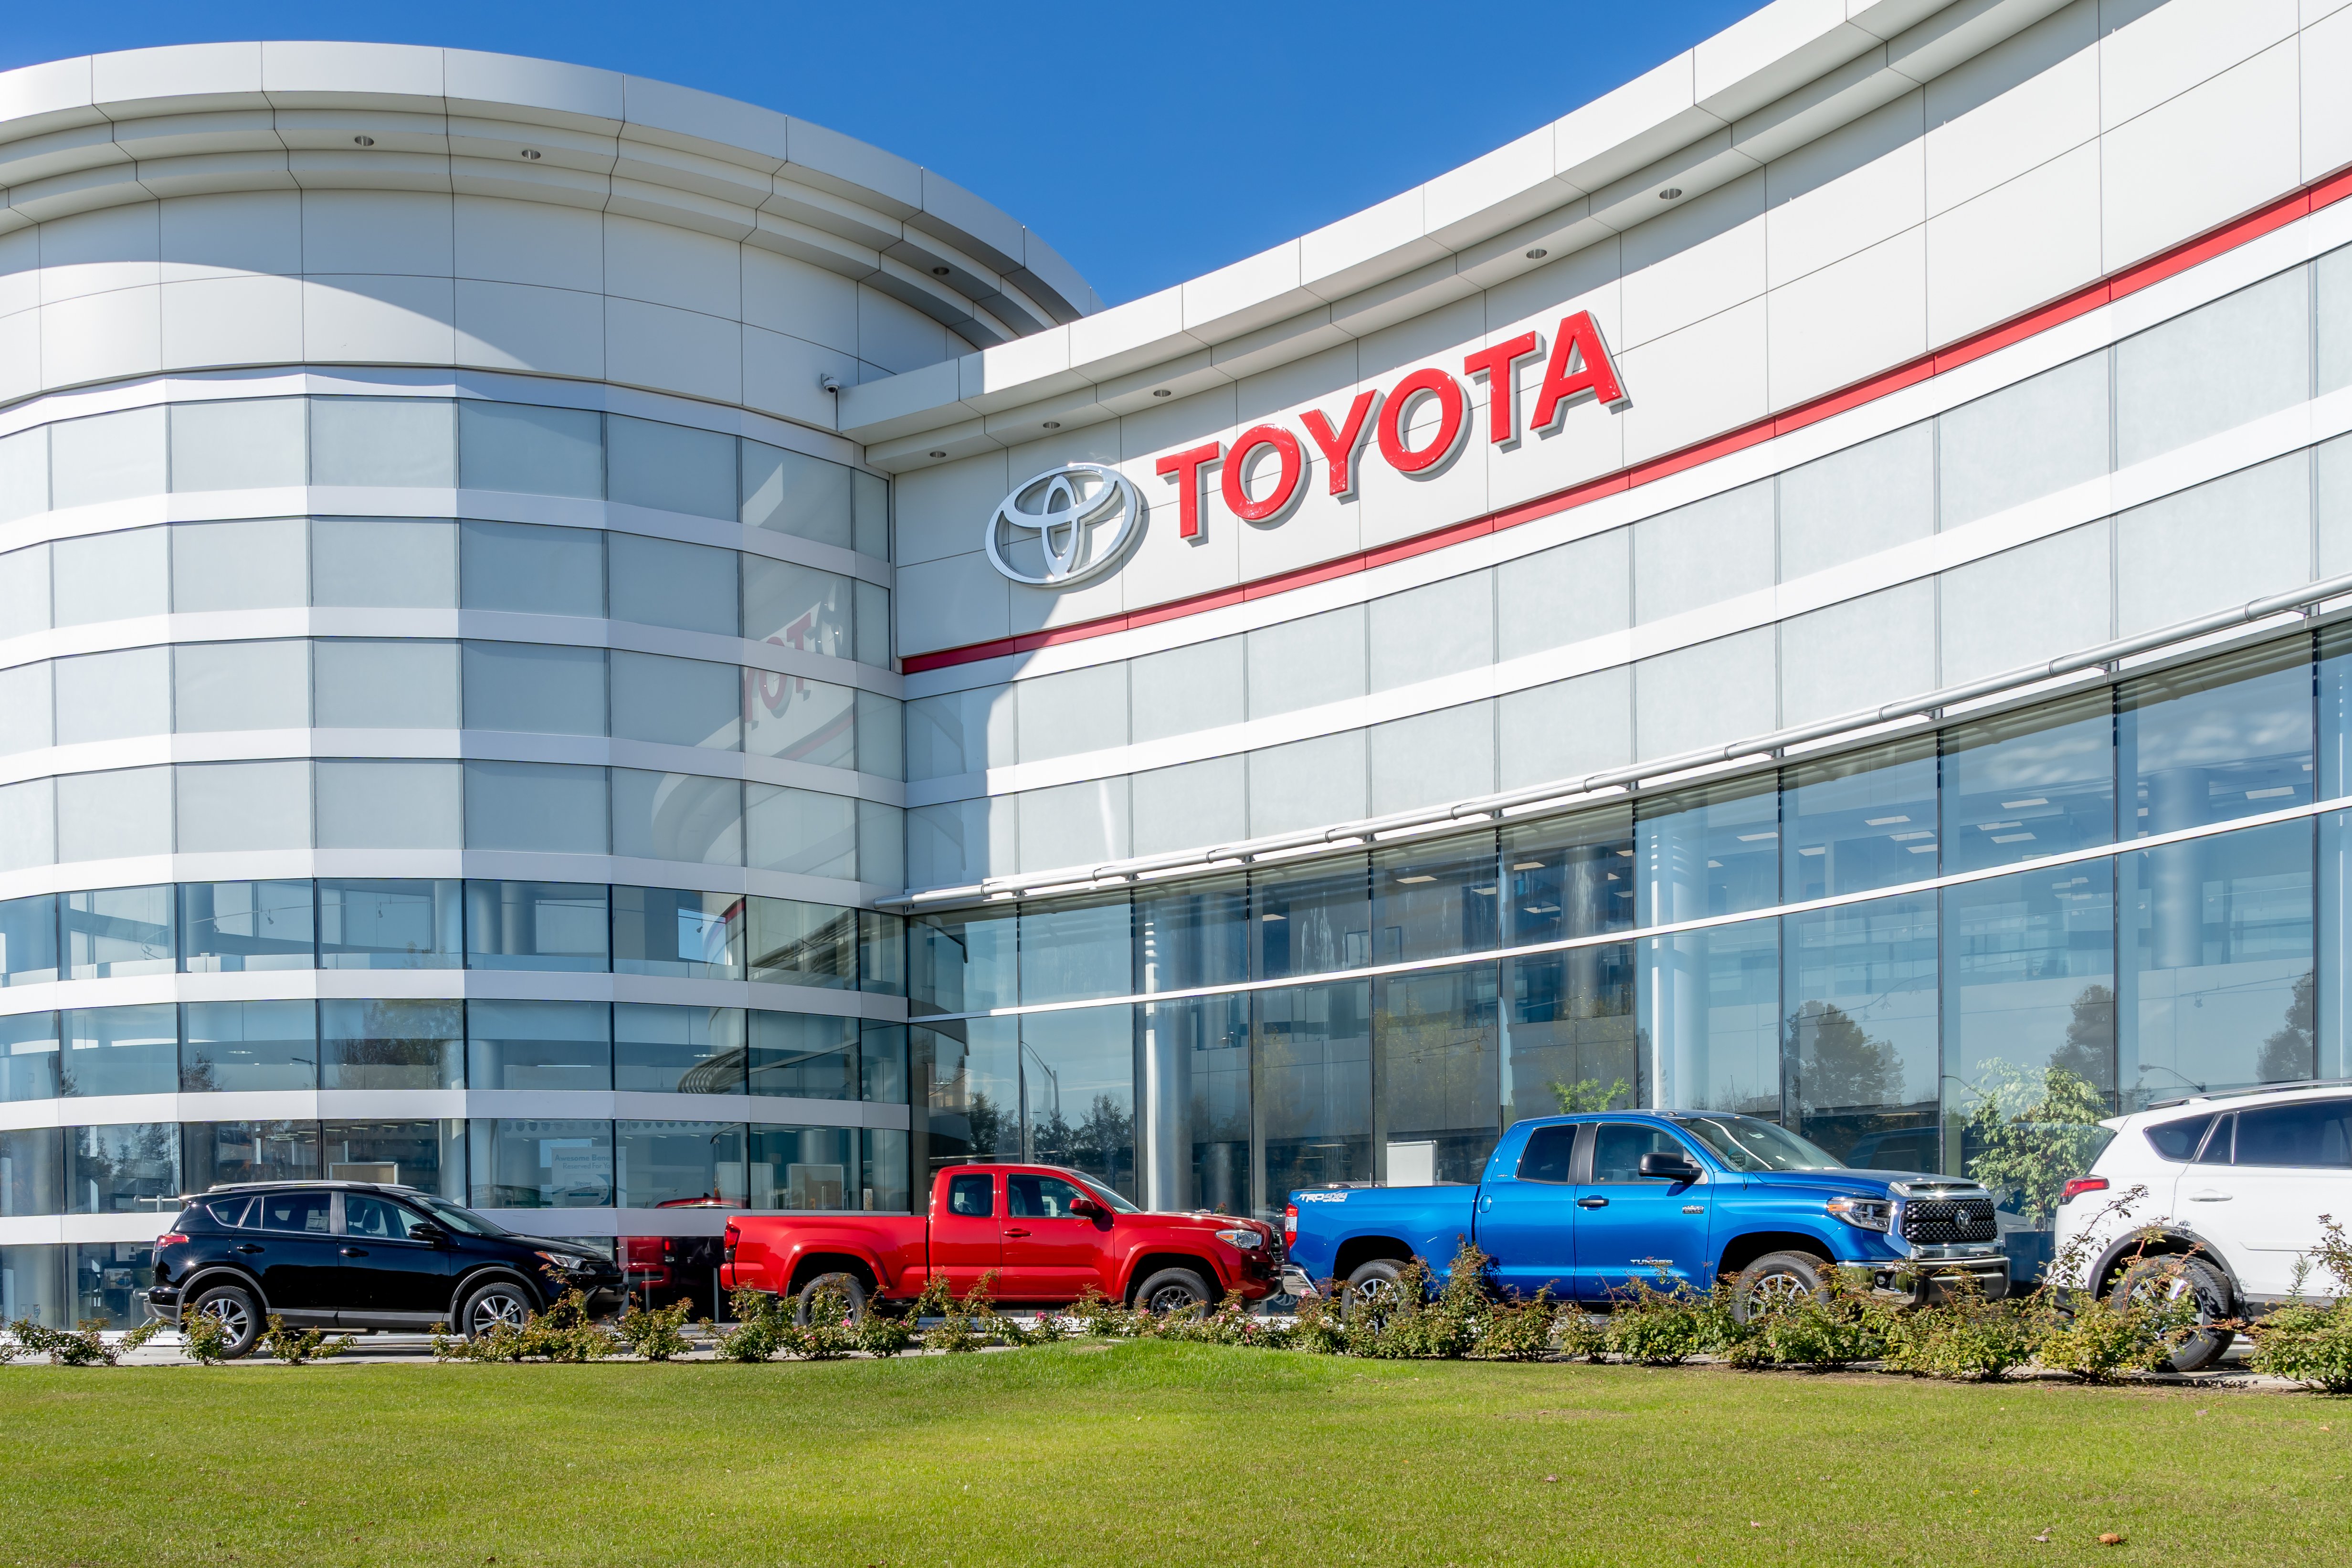 Toyota offers rapid testing to workers